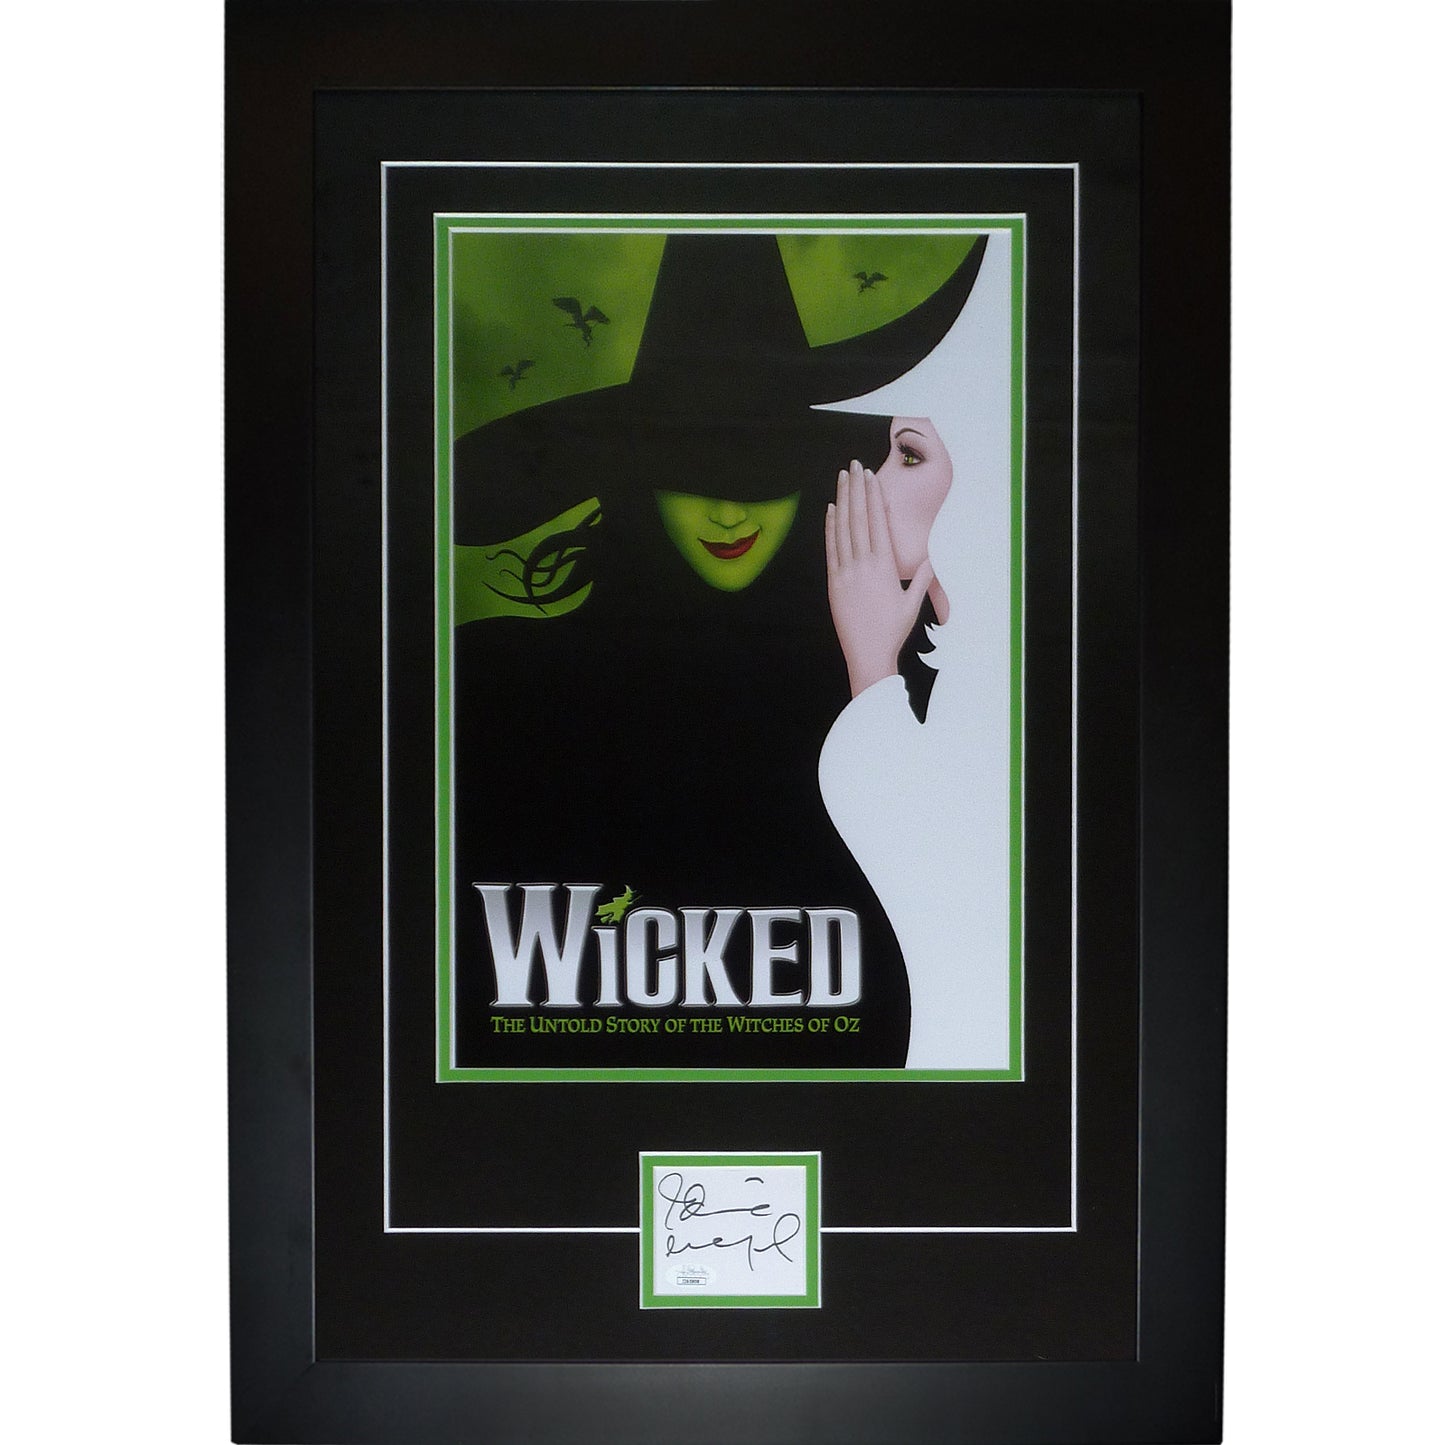 Wicked 11x17 Movie Poster Deluxe Framed with Idina Menzel Autograph - JSA